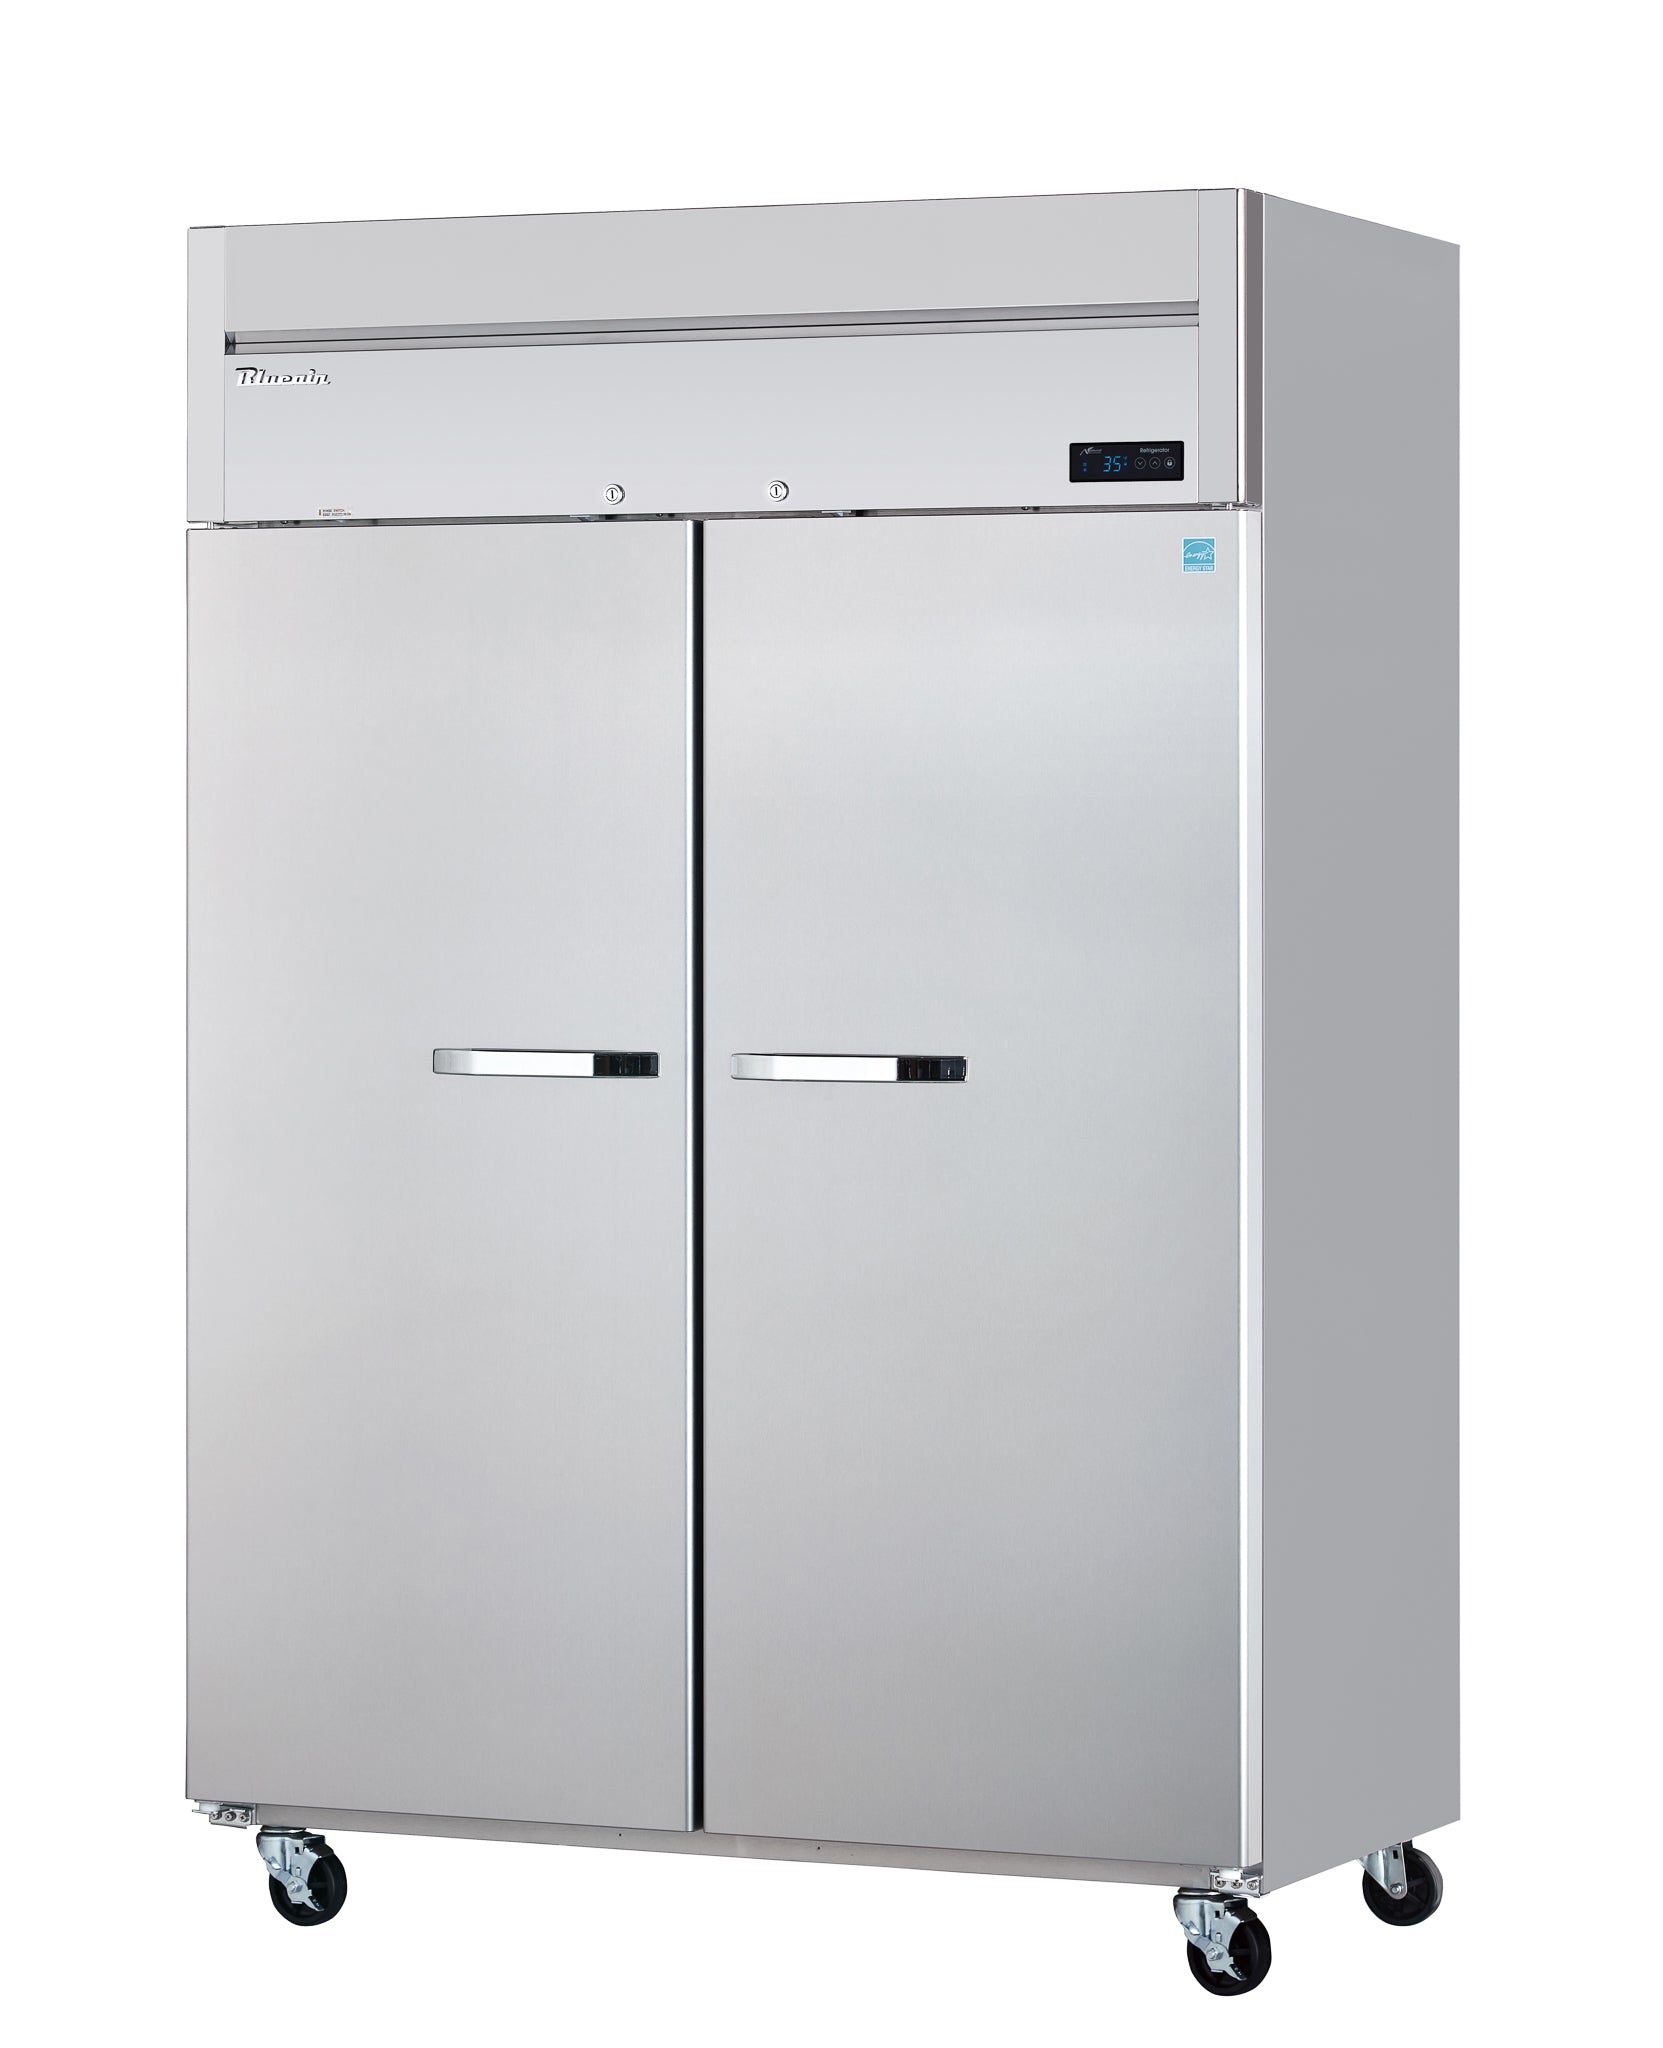 Blue Air - BSR49T-HC, 2 Solid Doors Stainless Refrigerator, Top-Mount Compressor, R-290 Refrigerant